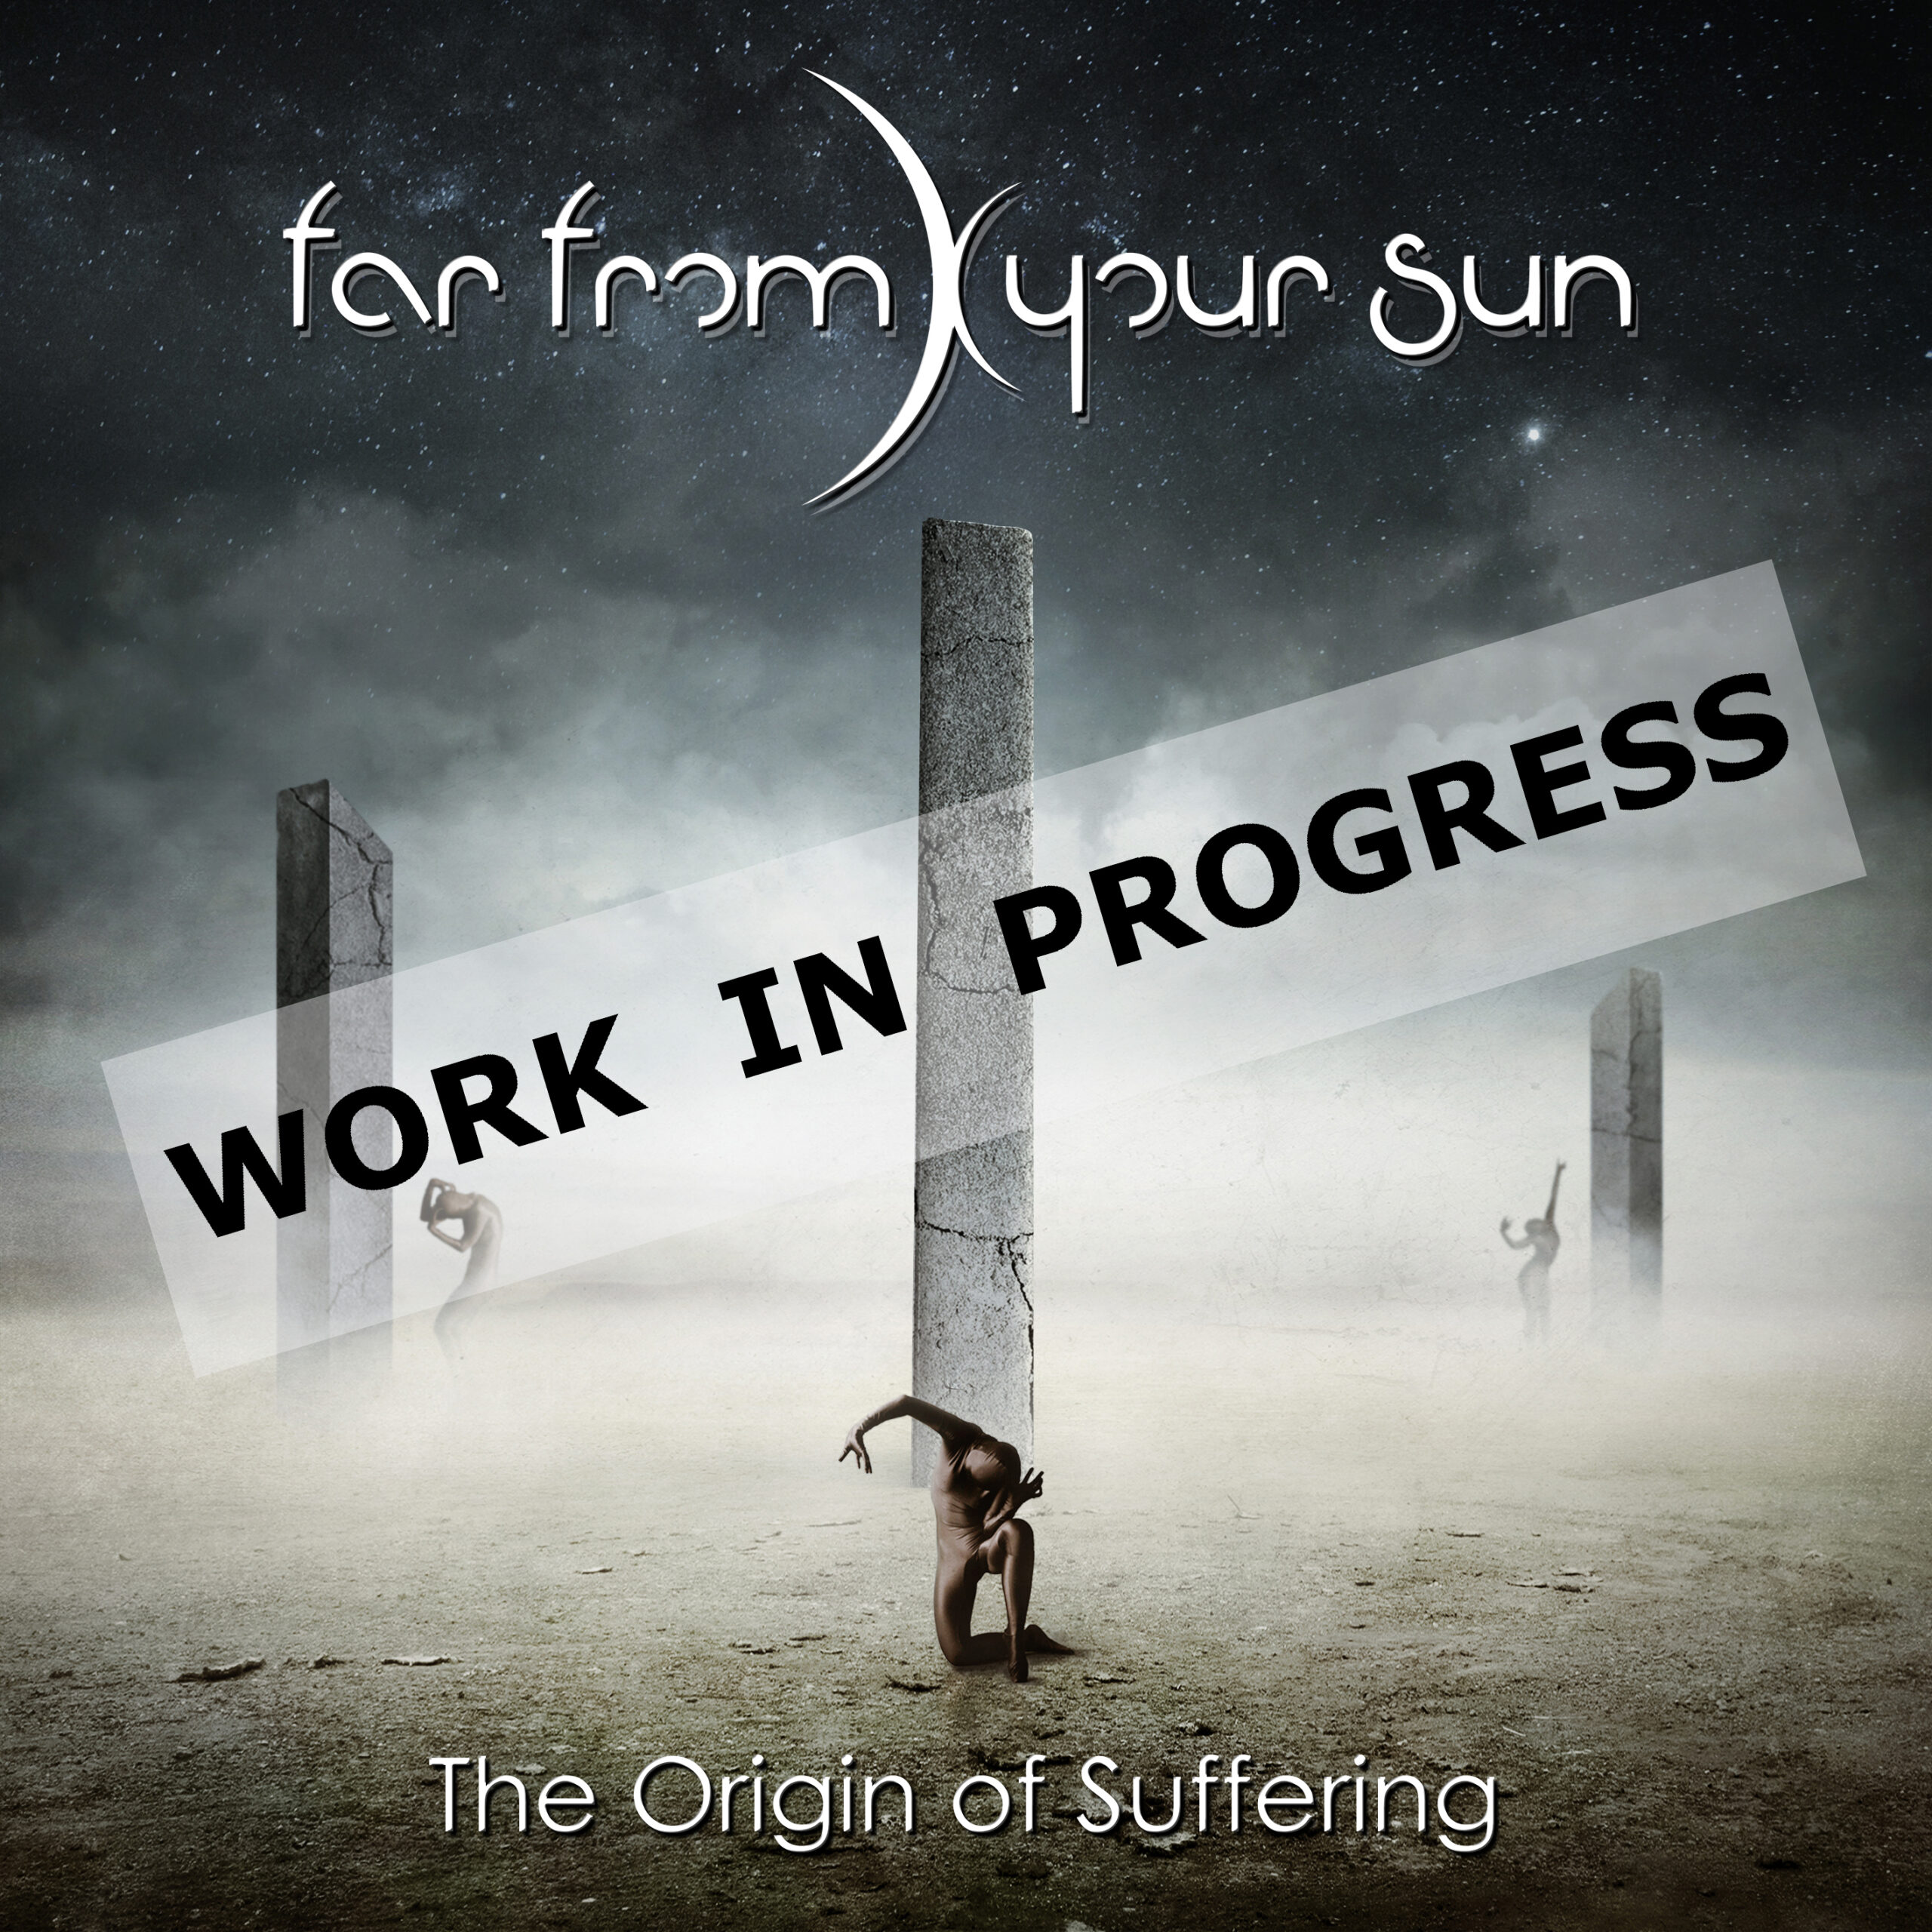 Far From Your Sun (FFYS) announce their soon to released album “The Origin of Suffering” (2022)